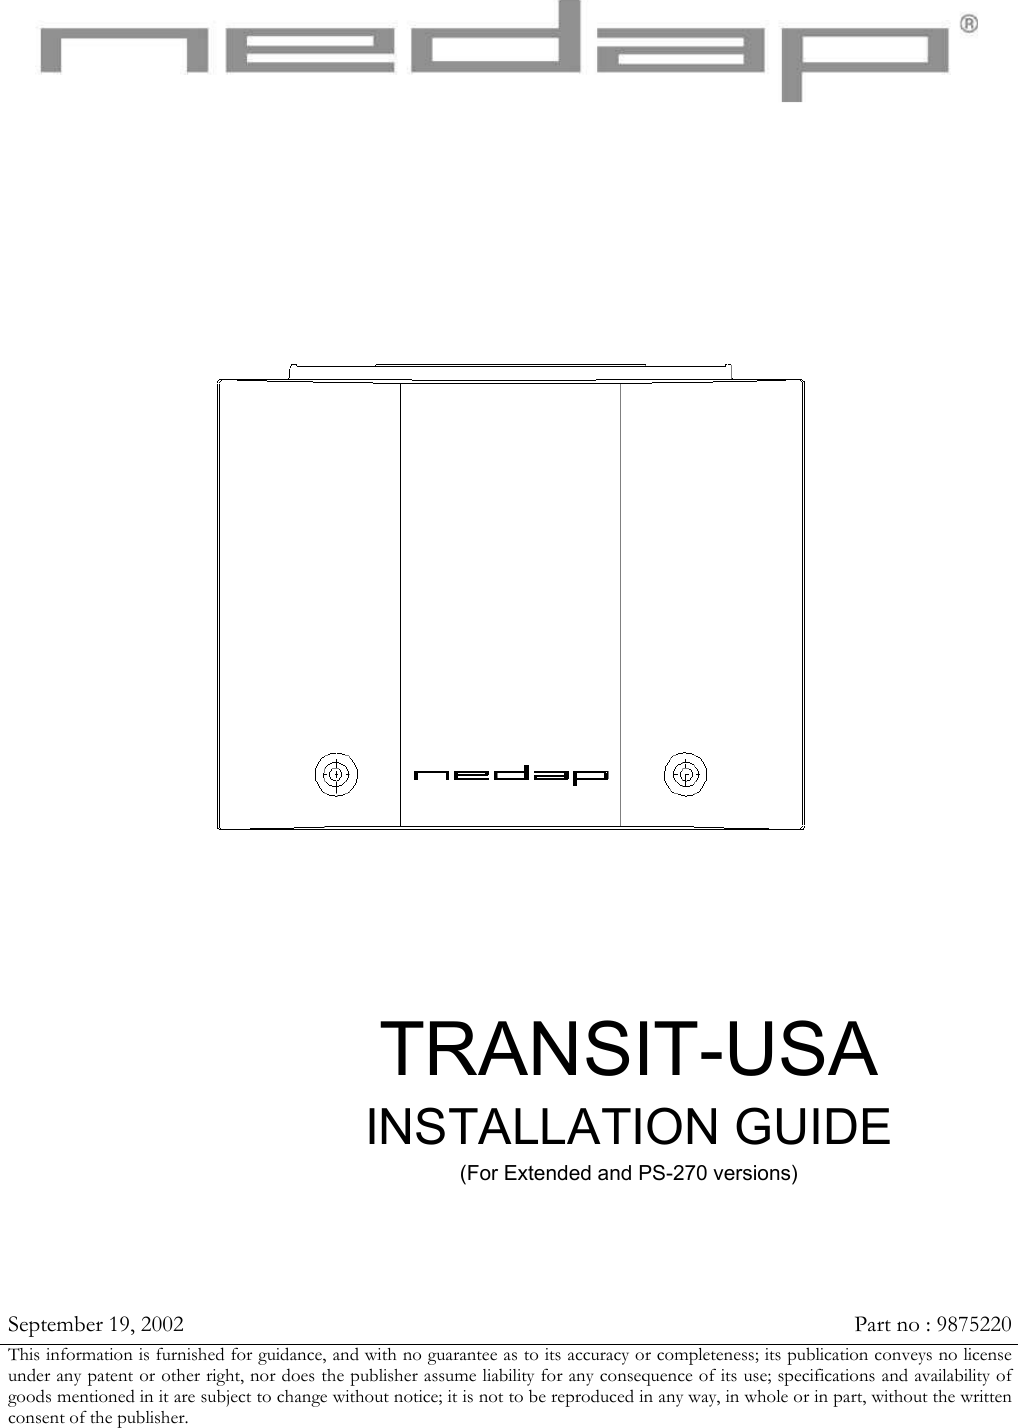                                            TRANSIT-USAINSTALLATION GUIDE (For Extended and PS-270 versions)            September 19, 2002  Part no : 9875220 This information is furnished for guidance, and with no guarantee as to its accuracy or completeness; its publication conveys no license under any patent or other right, nor does the publisher assume liability for any consequence of its use; specifications and availability of goods mentioned in it are subject to change without notice; it is not to be reproduced in any way, in whole or in part, without the written consent of the publisher. 